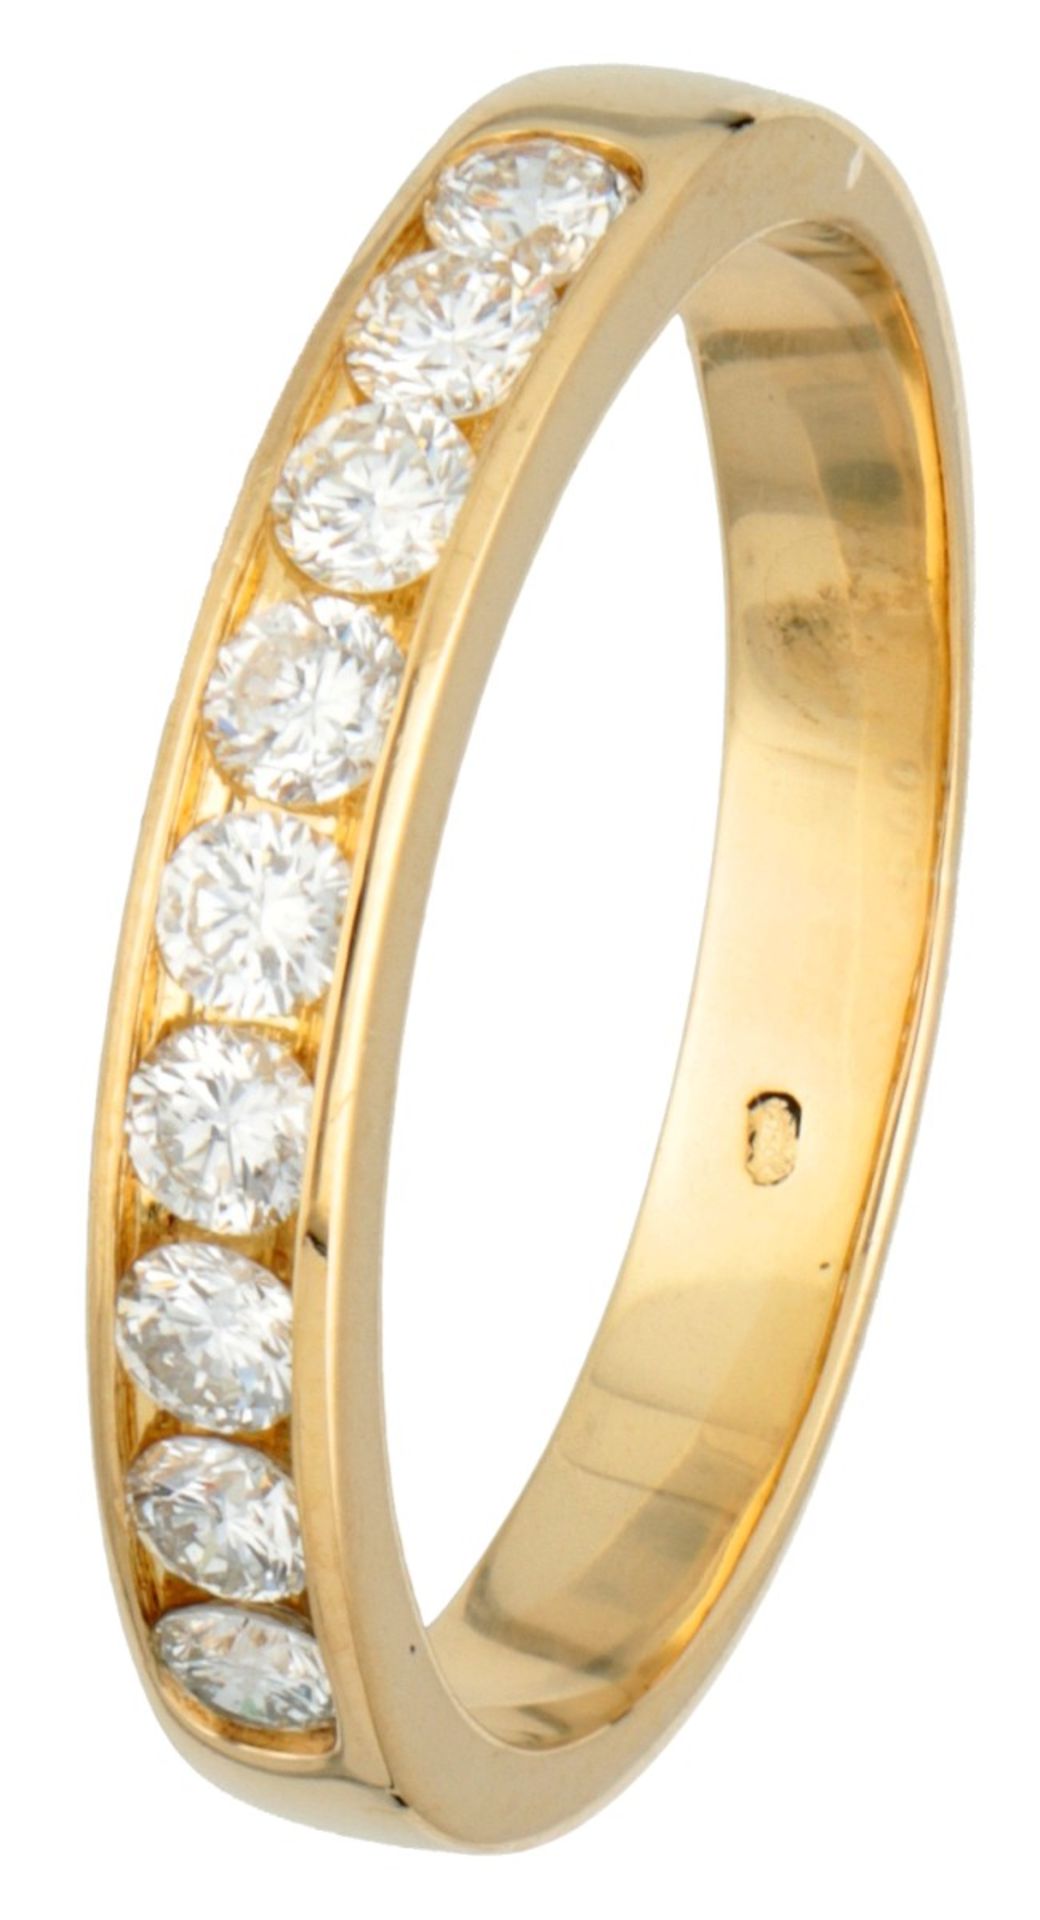 18K. Yellow gold river ring set with approx. 0.63 ct. diamond.